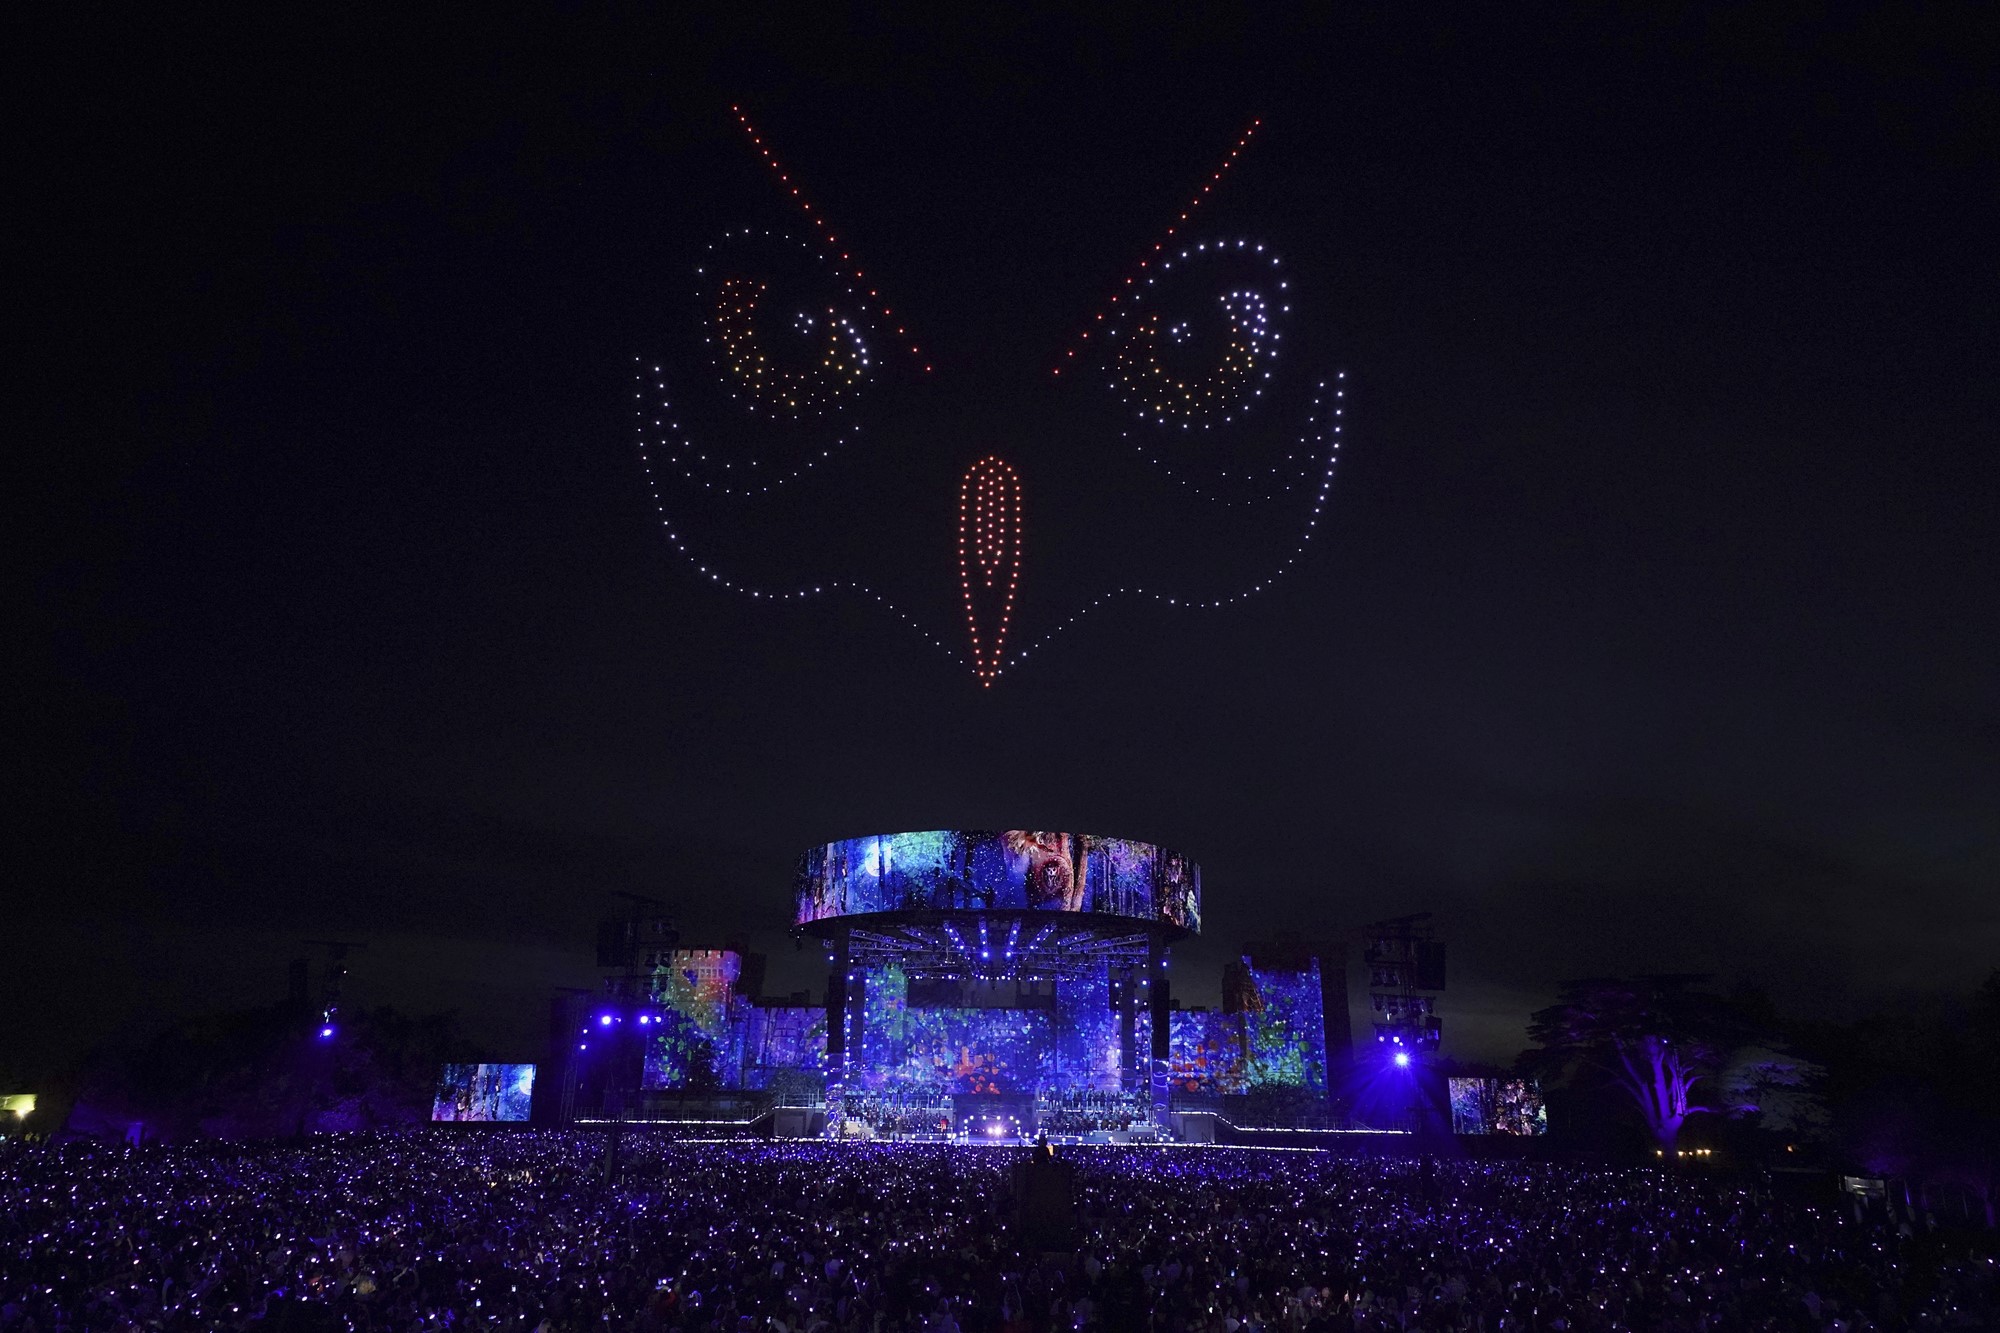 Drones in the night sky create an image of an owl with lights.